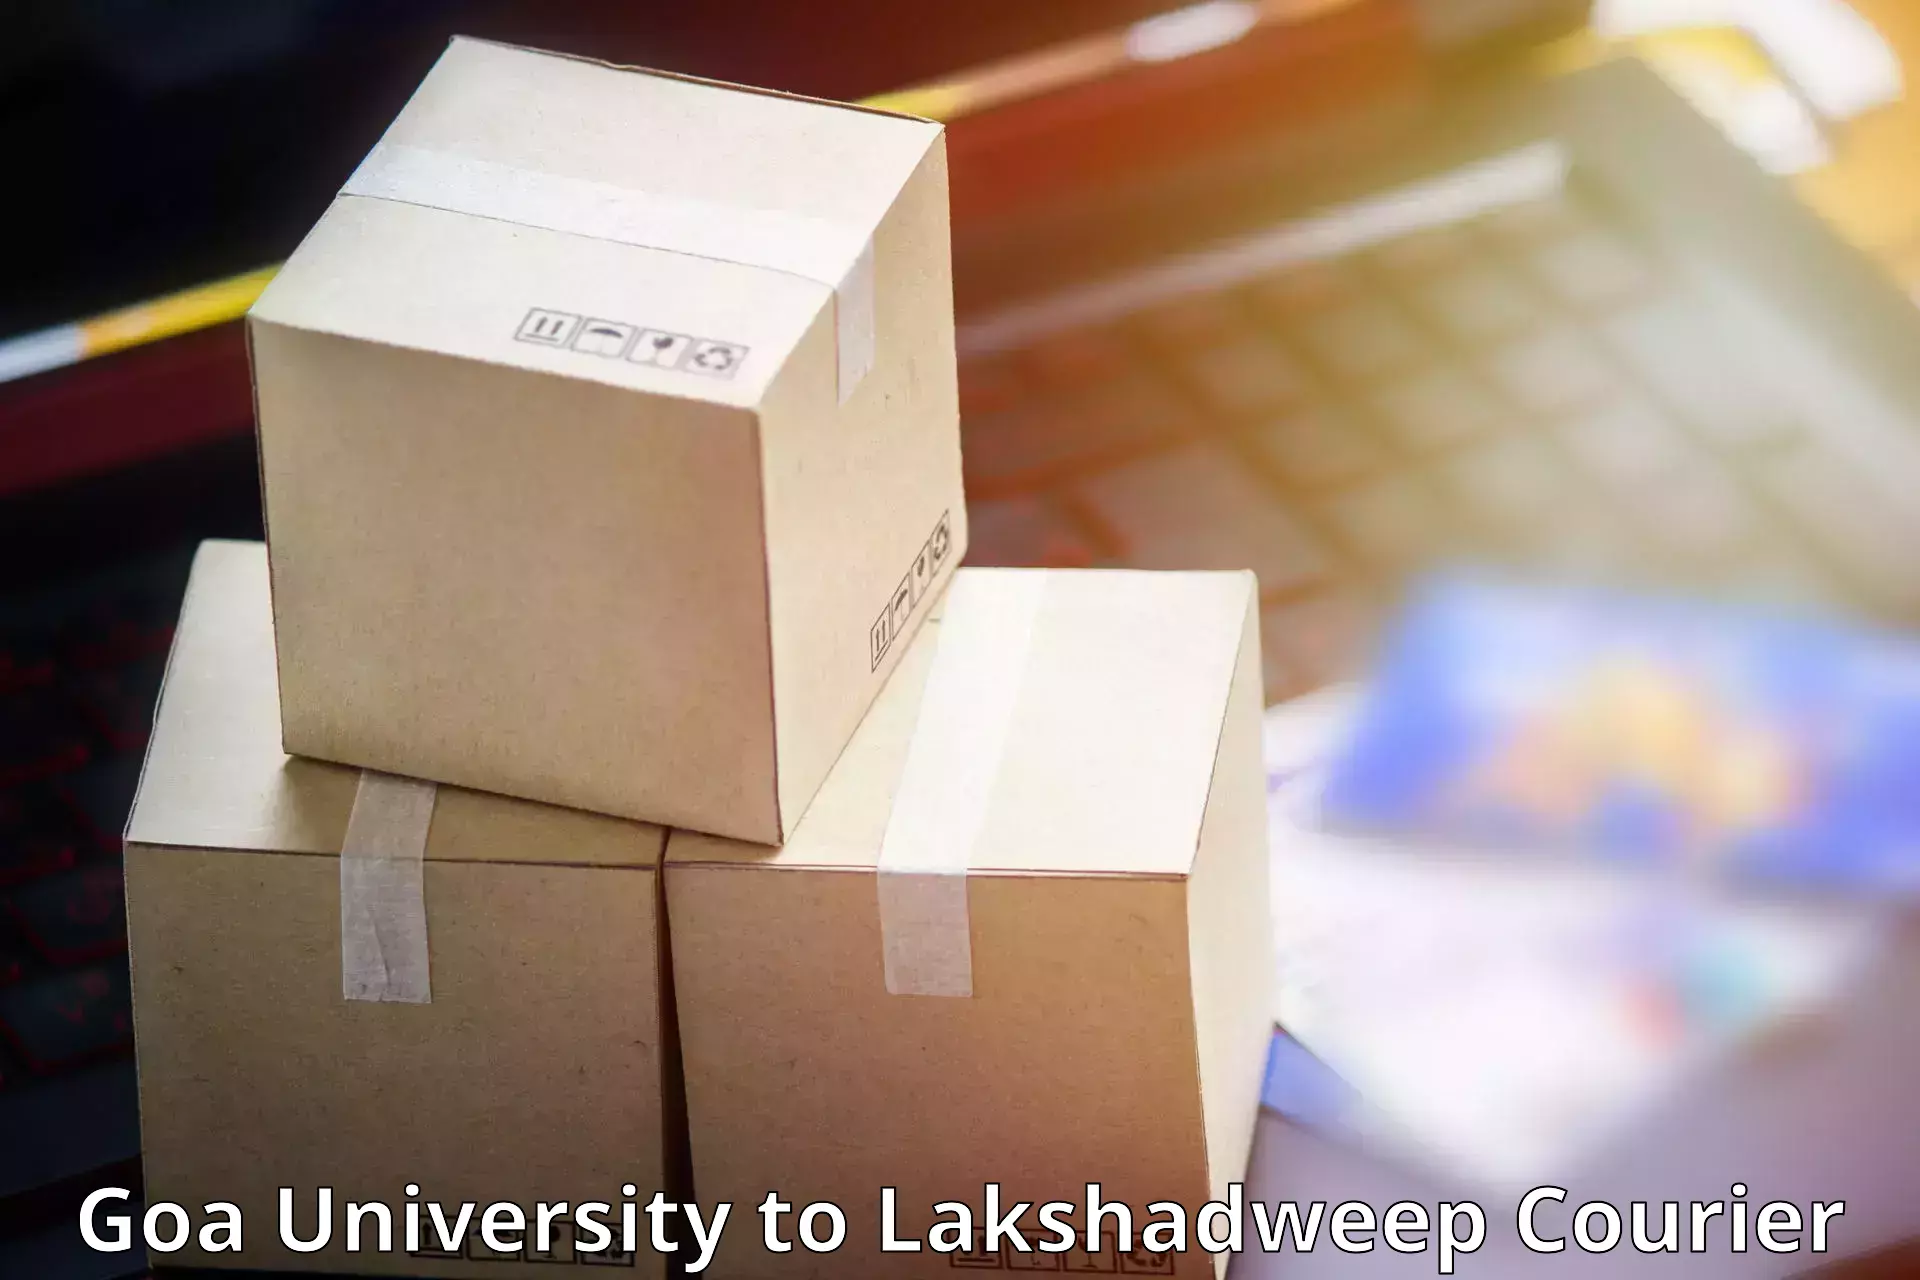 Rapid freight solutions Goa University to Lakshadweep